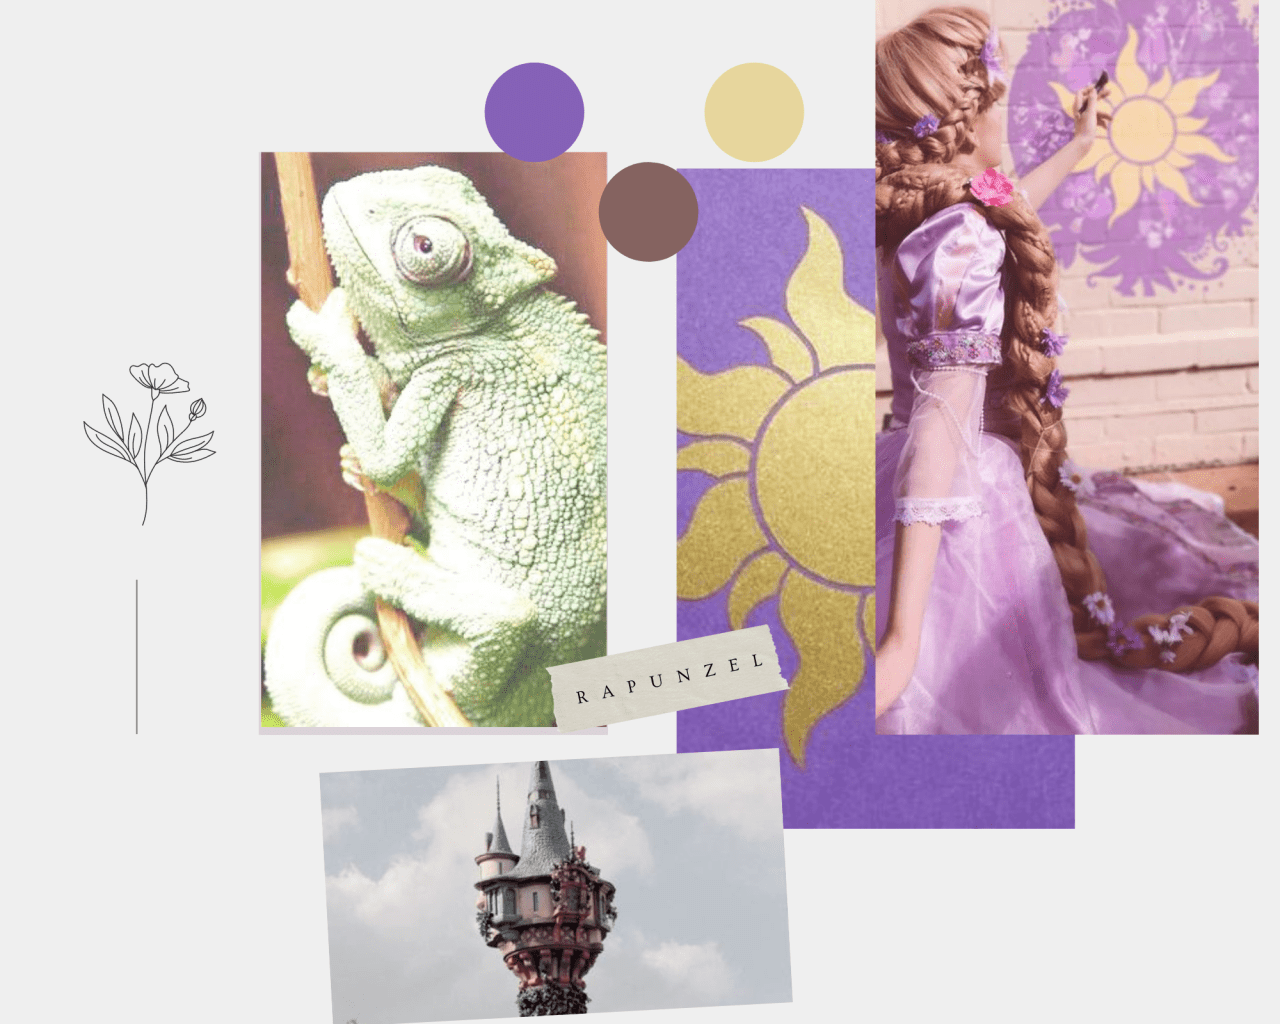 A mood board with images of Rapunzel and her tower. - Rapunzel